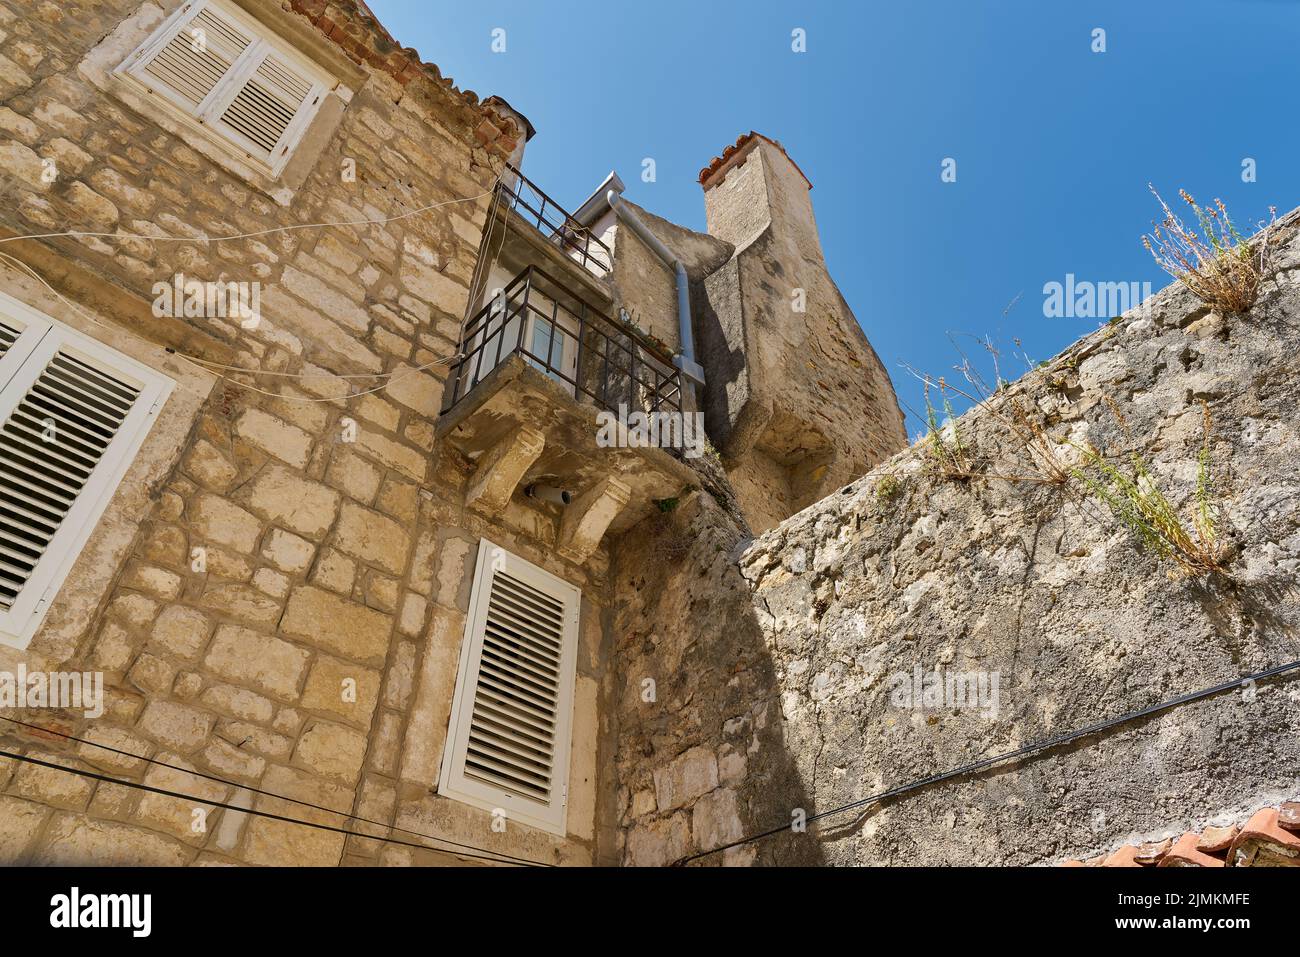 Historical for the region typical house in an alley in the old town of Rab in Croatia Stock Photo